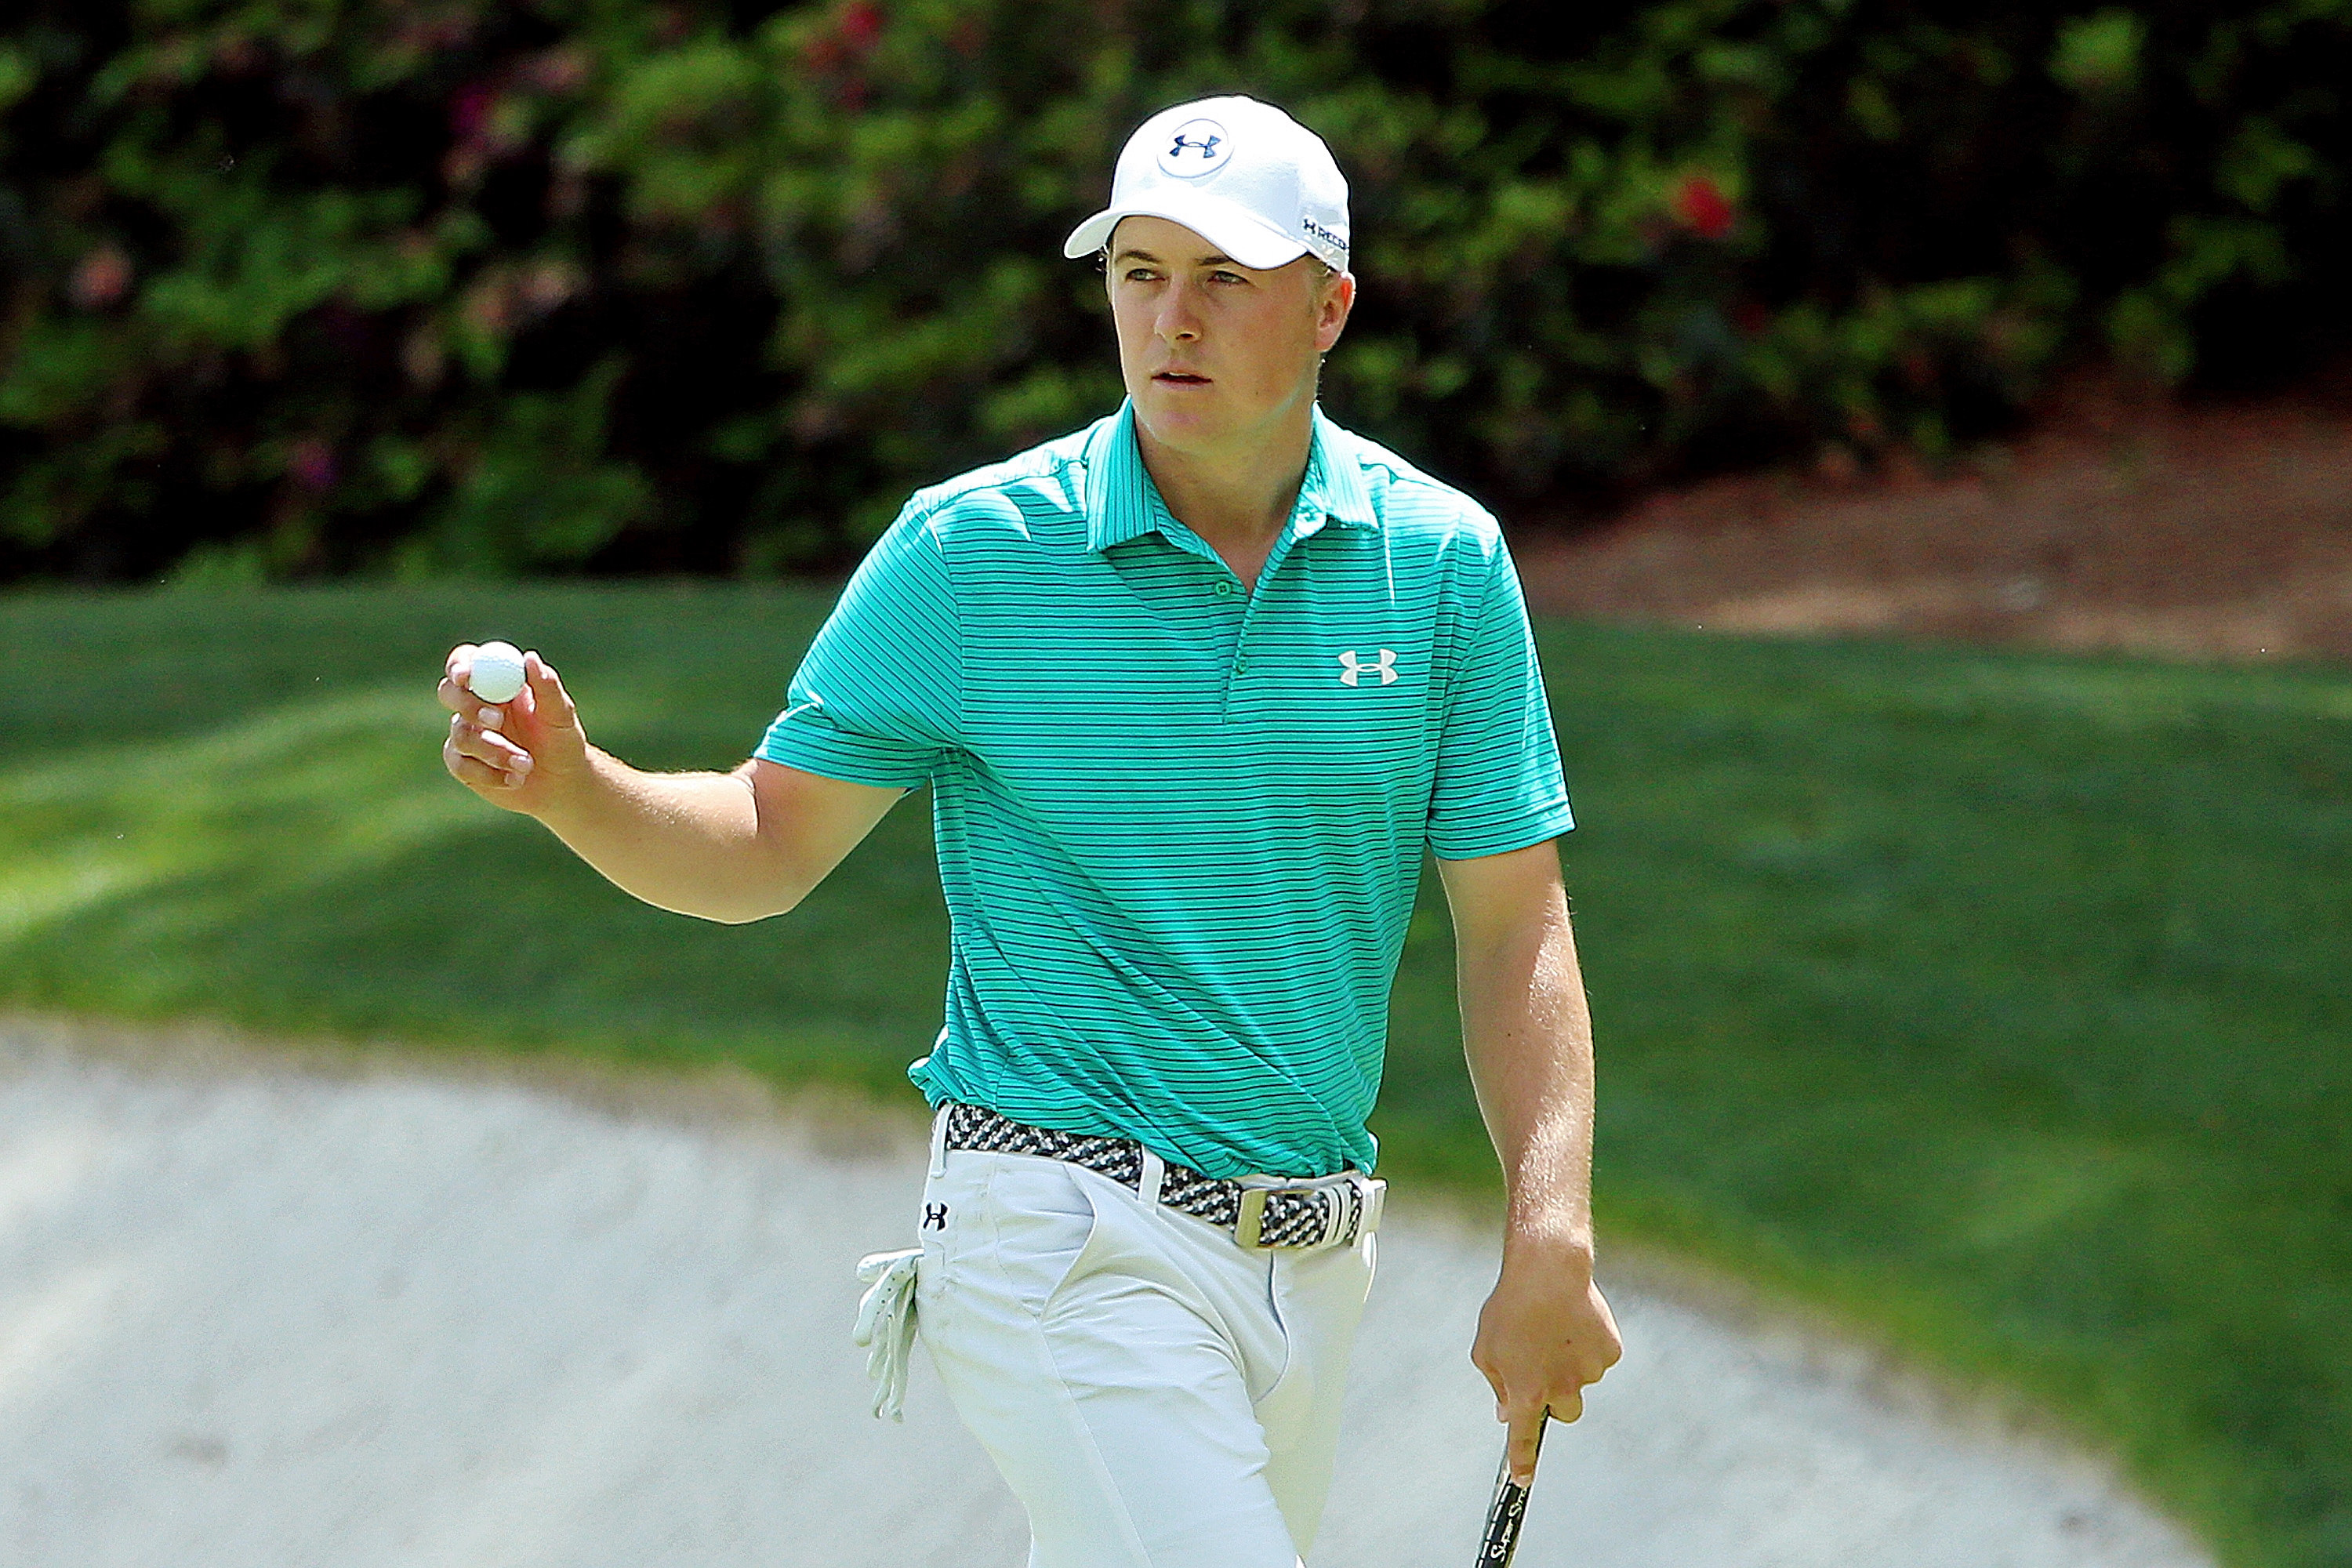 Masters 2016: Jordan Spieth two shots clear after opening round 66